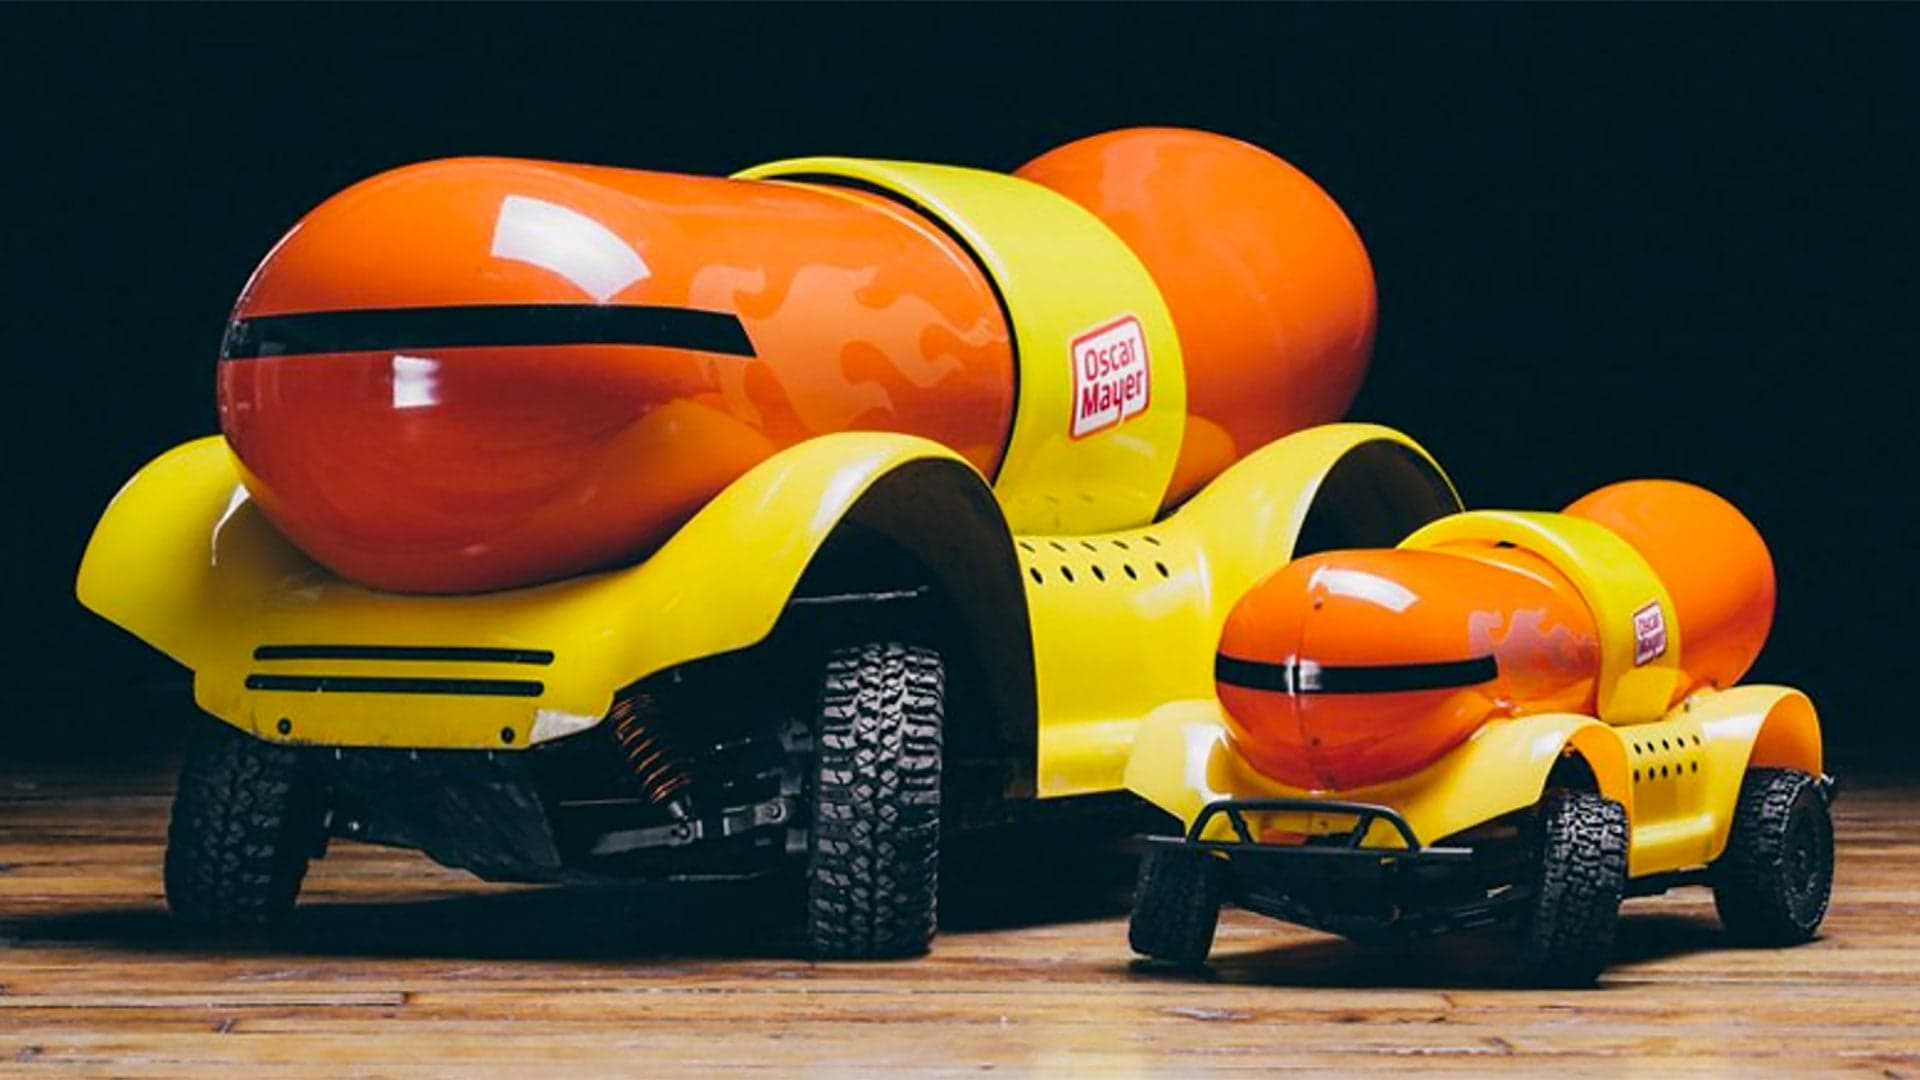 Your Offroad RC Oscar Mayer Wienermobile Is Here